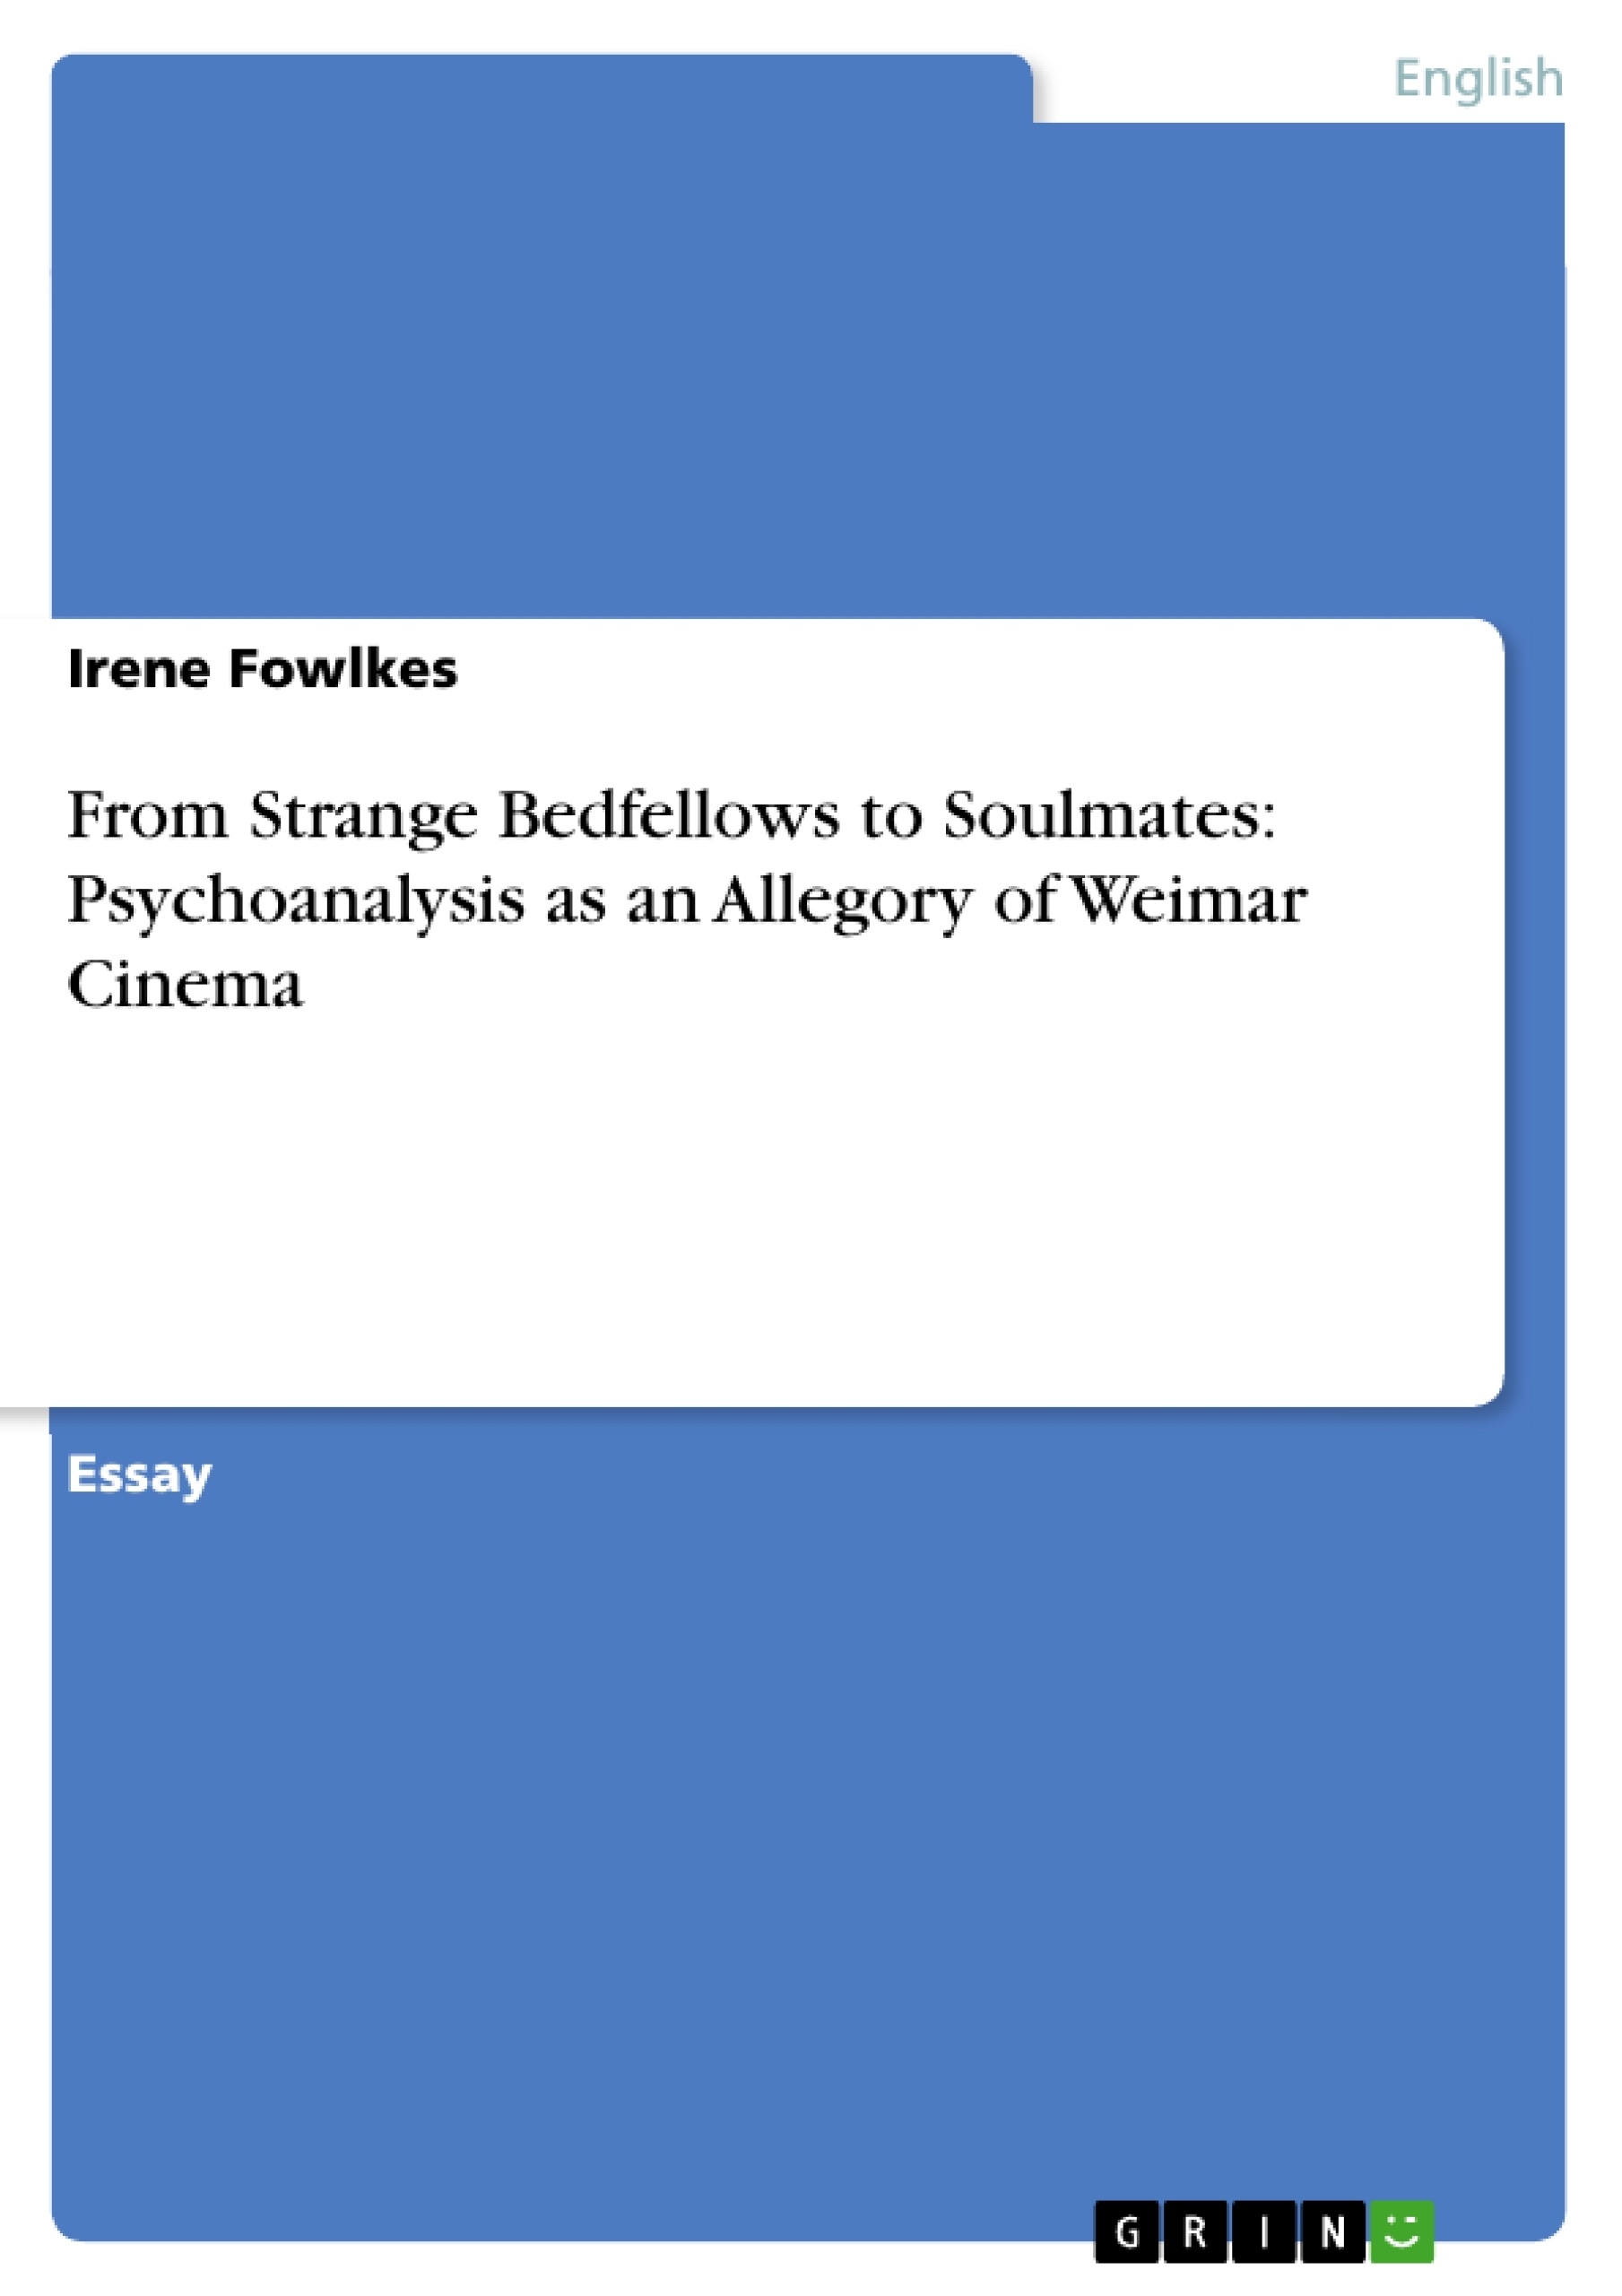 Title: From Strange Bedfellows to Soulmates: Psychoanalysis as an Allegory of Weimar Cinema